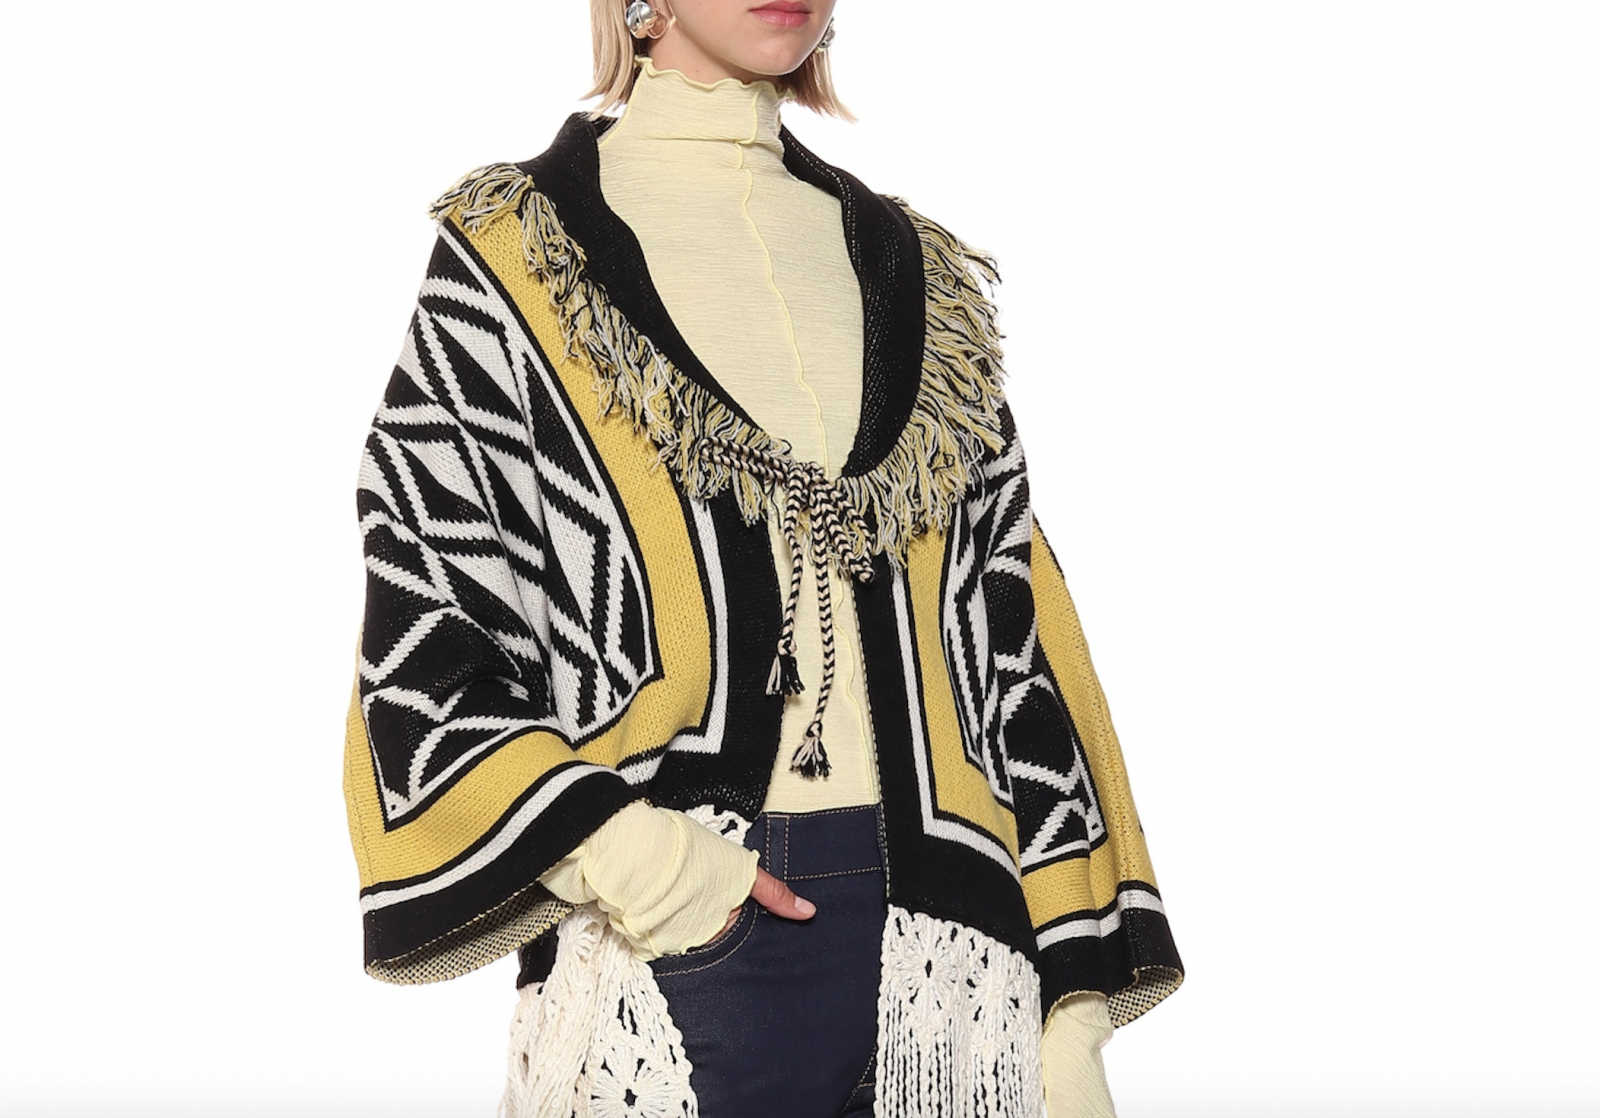 This $2,500 Sweater Being Sold by MyTheresa, Neiman Marcus Violates the ...